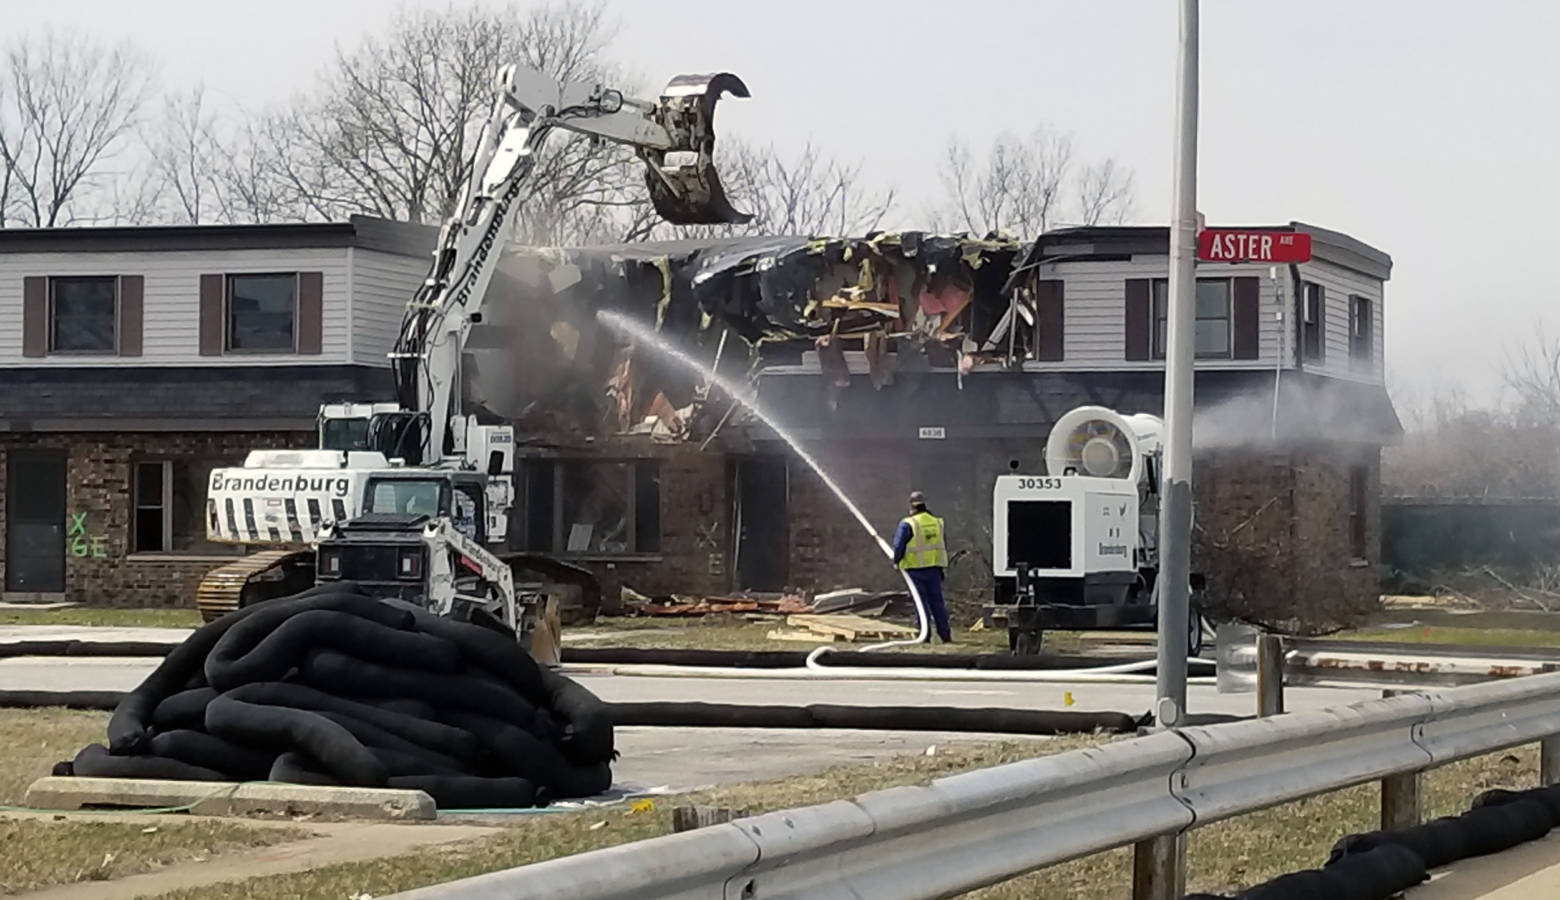 Crews begin tearing down a portion of the West Calumet Housing Complex on April 2. They drench the debris to prevent the spread of lead and arsenic contamination to the surrounding neighborhood. (Lauren Chapman/IPB News)